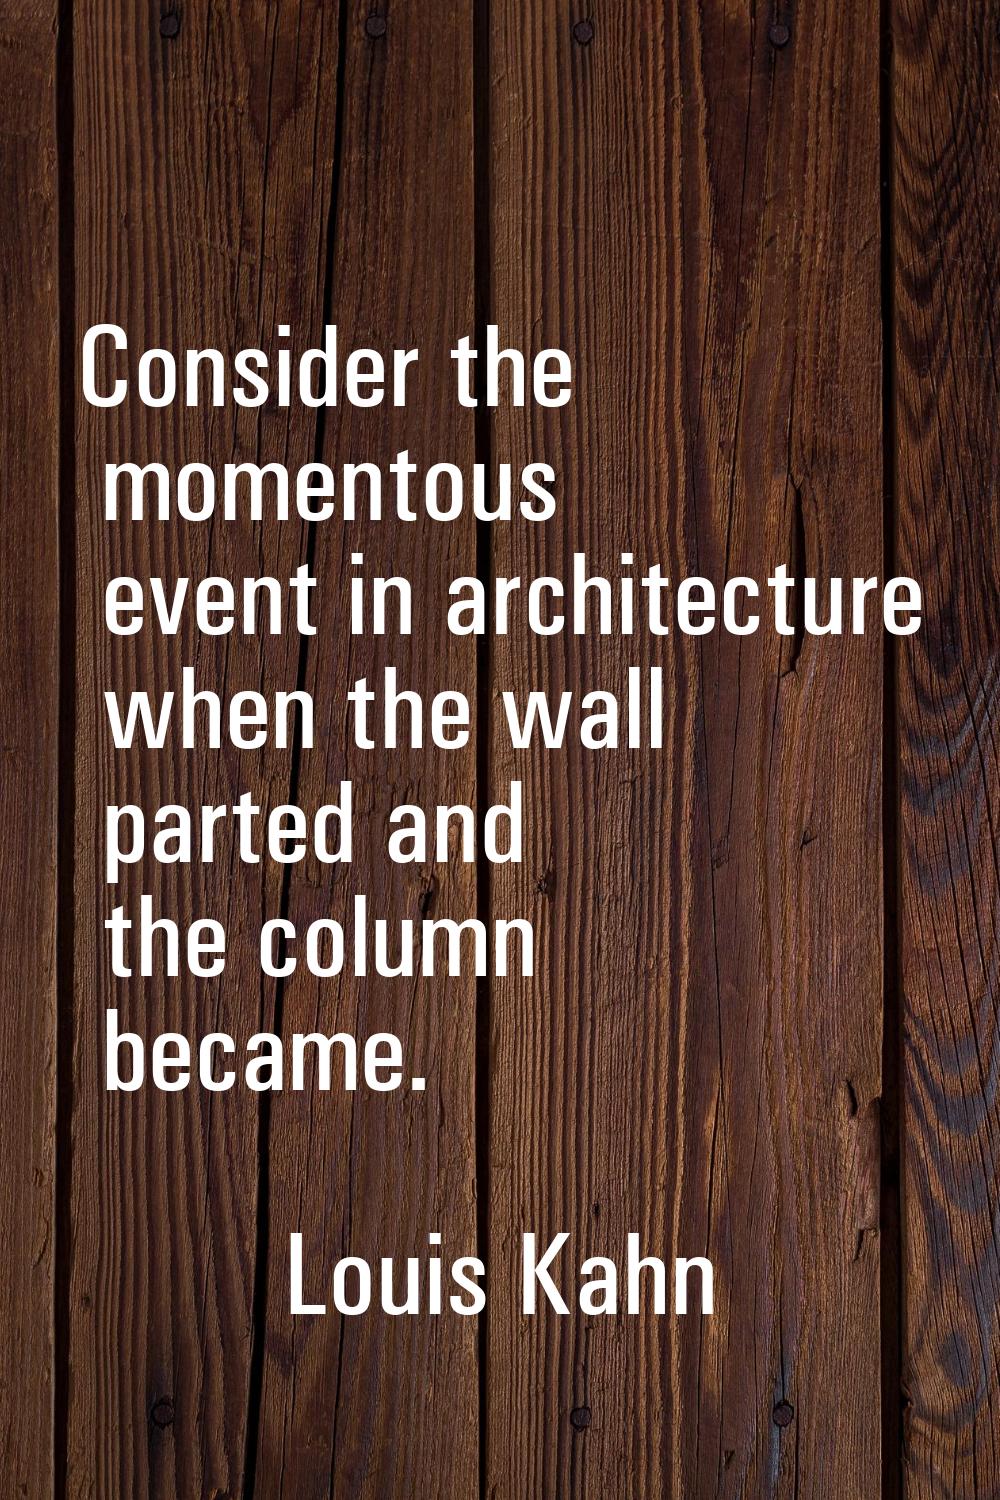 Consider the momentous event in architecture when the wall parted and the column became.